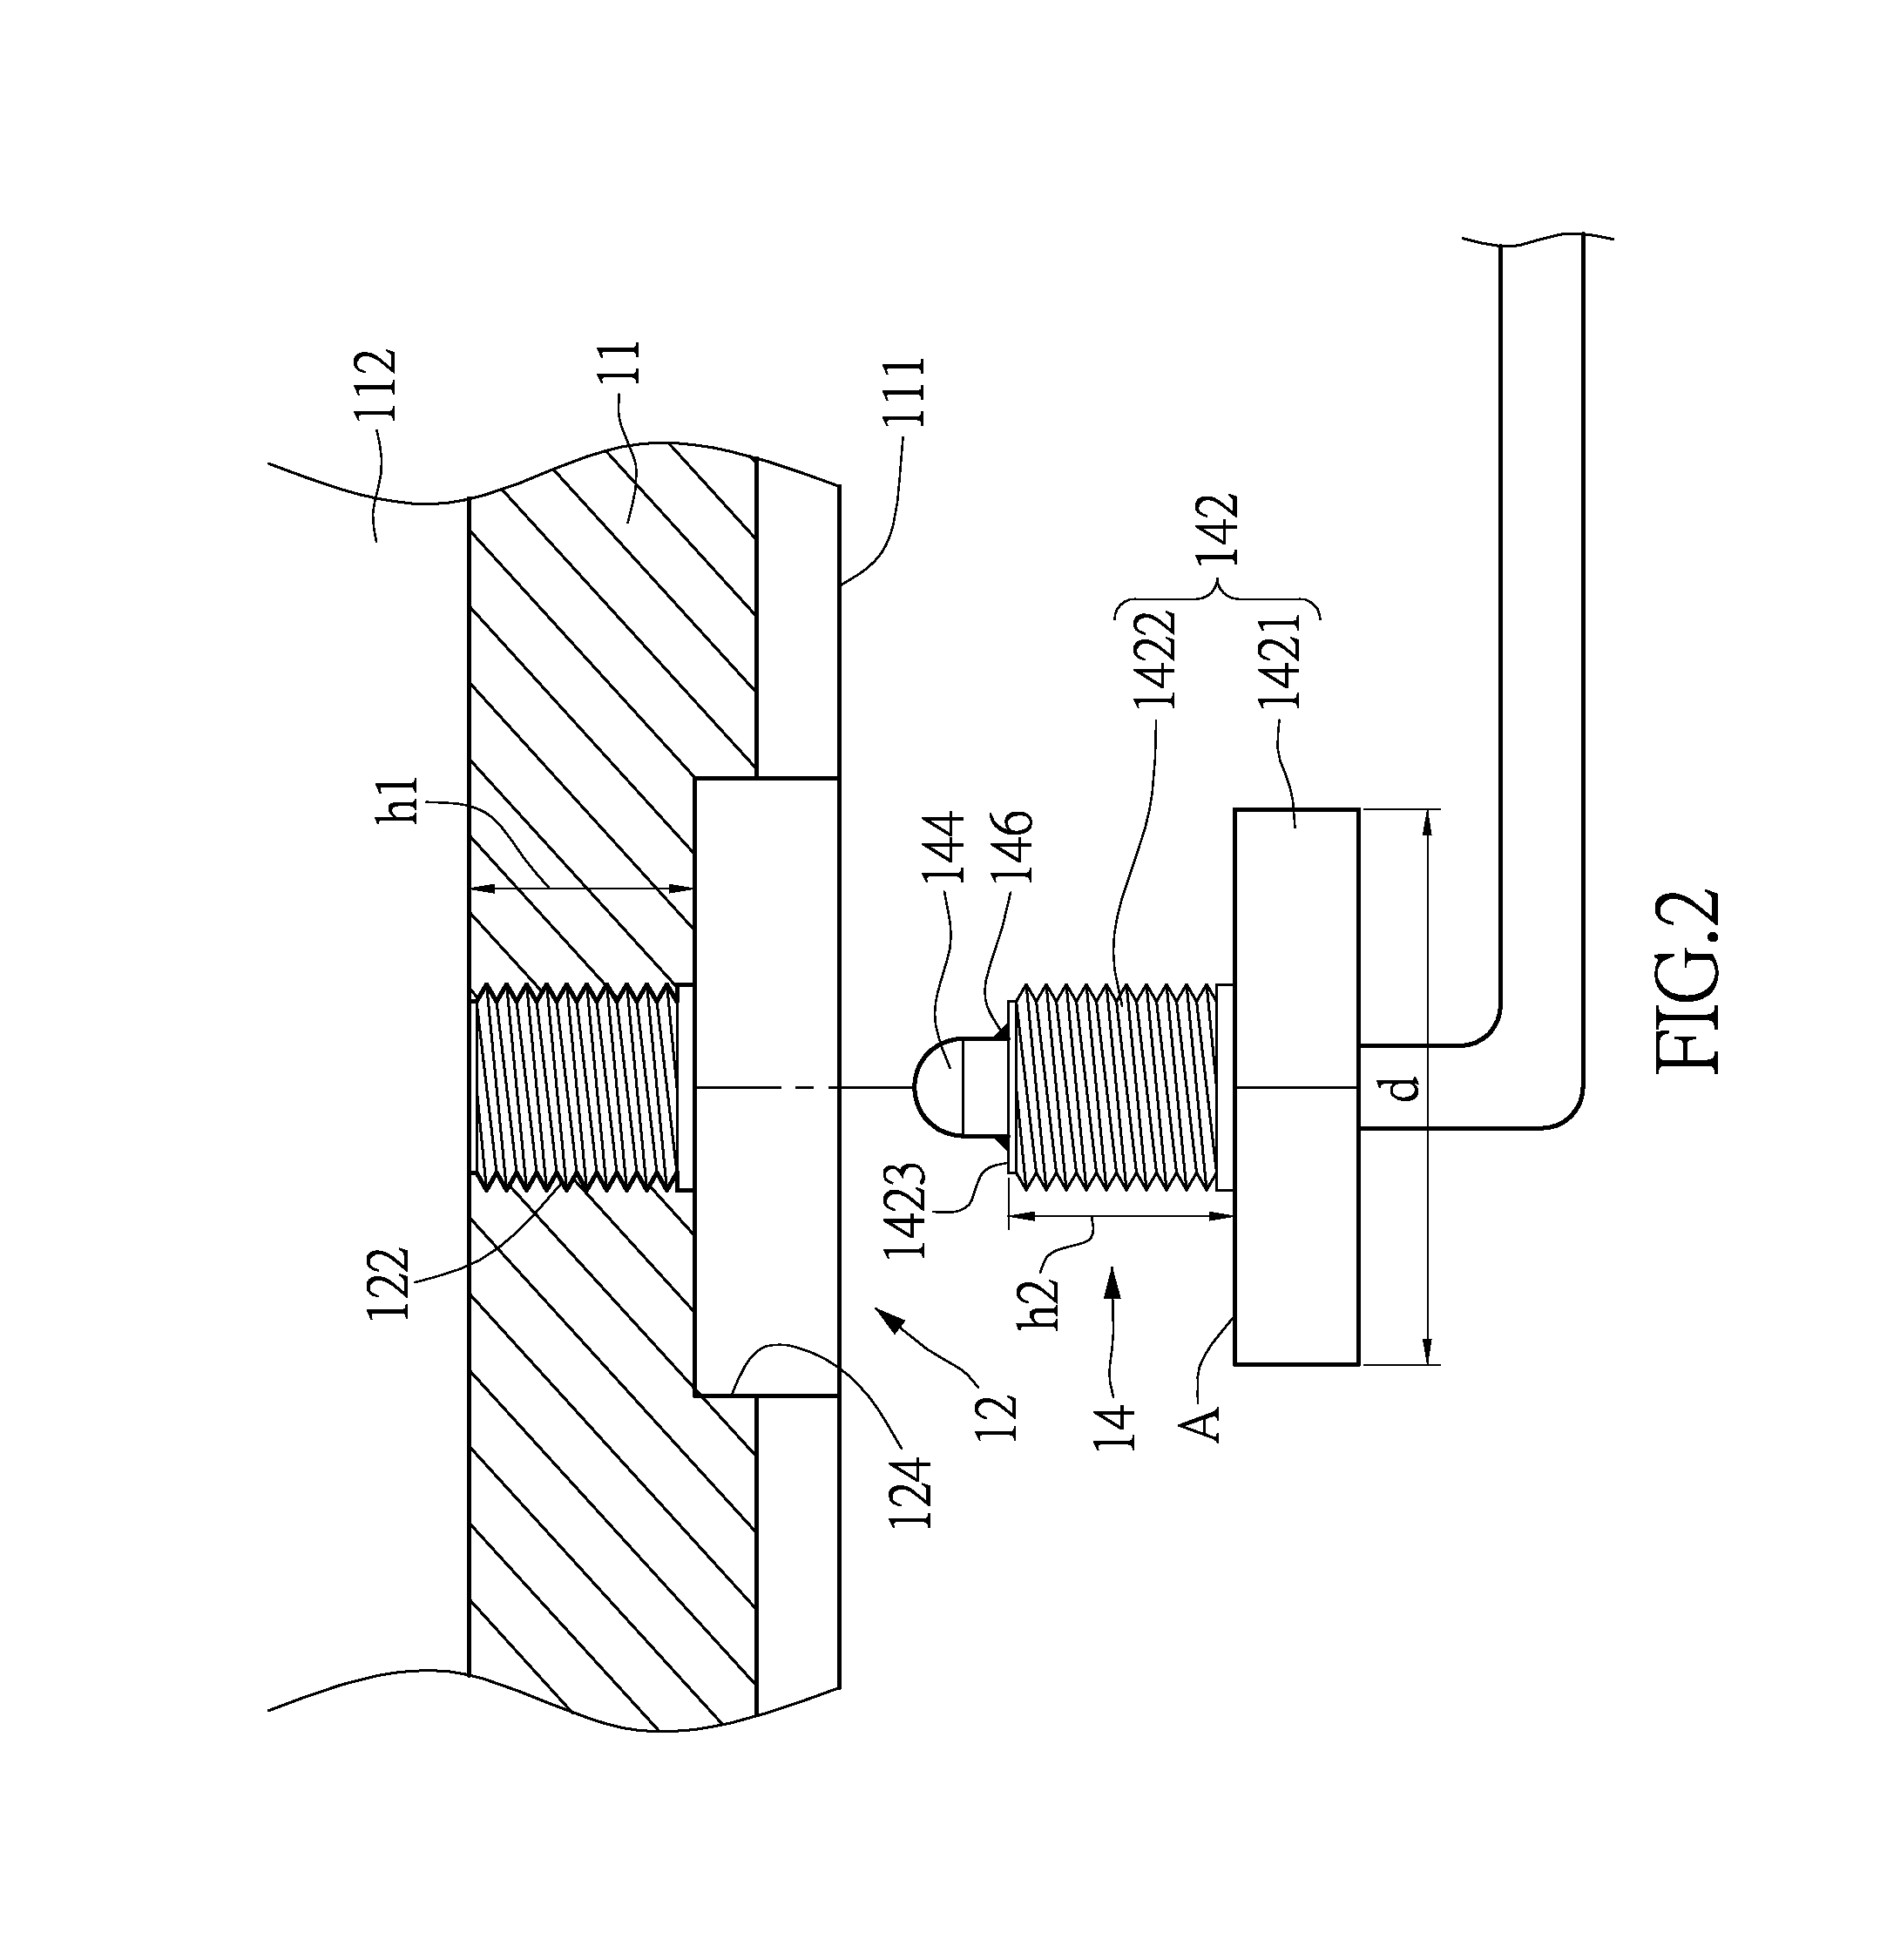 Temperature measurement component embedded hot runner nozzle structure